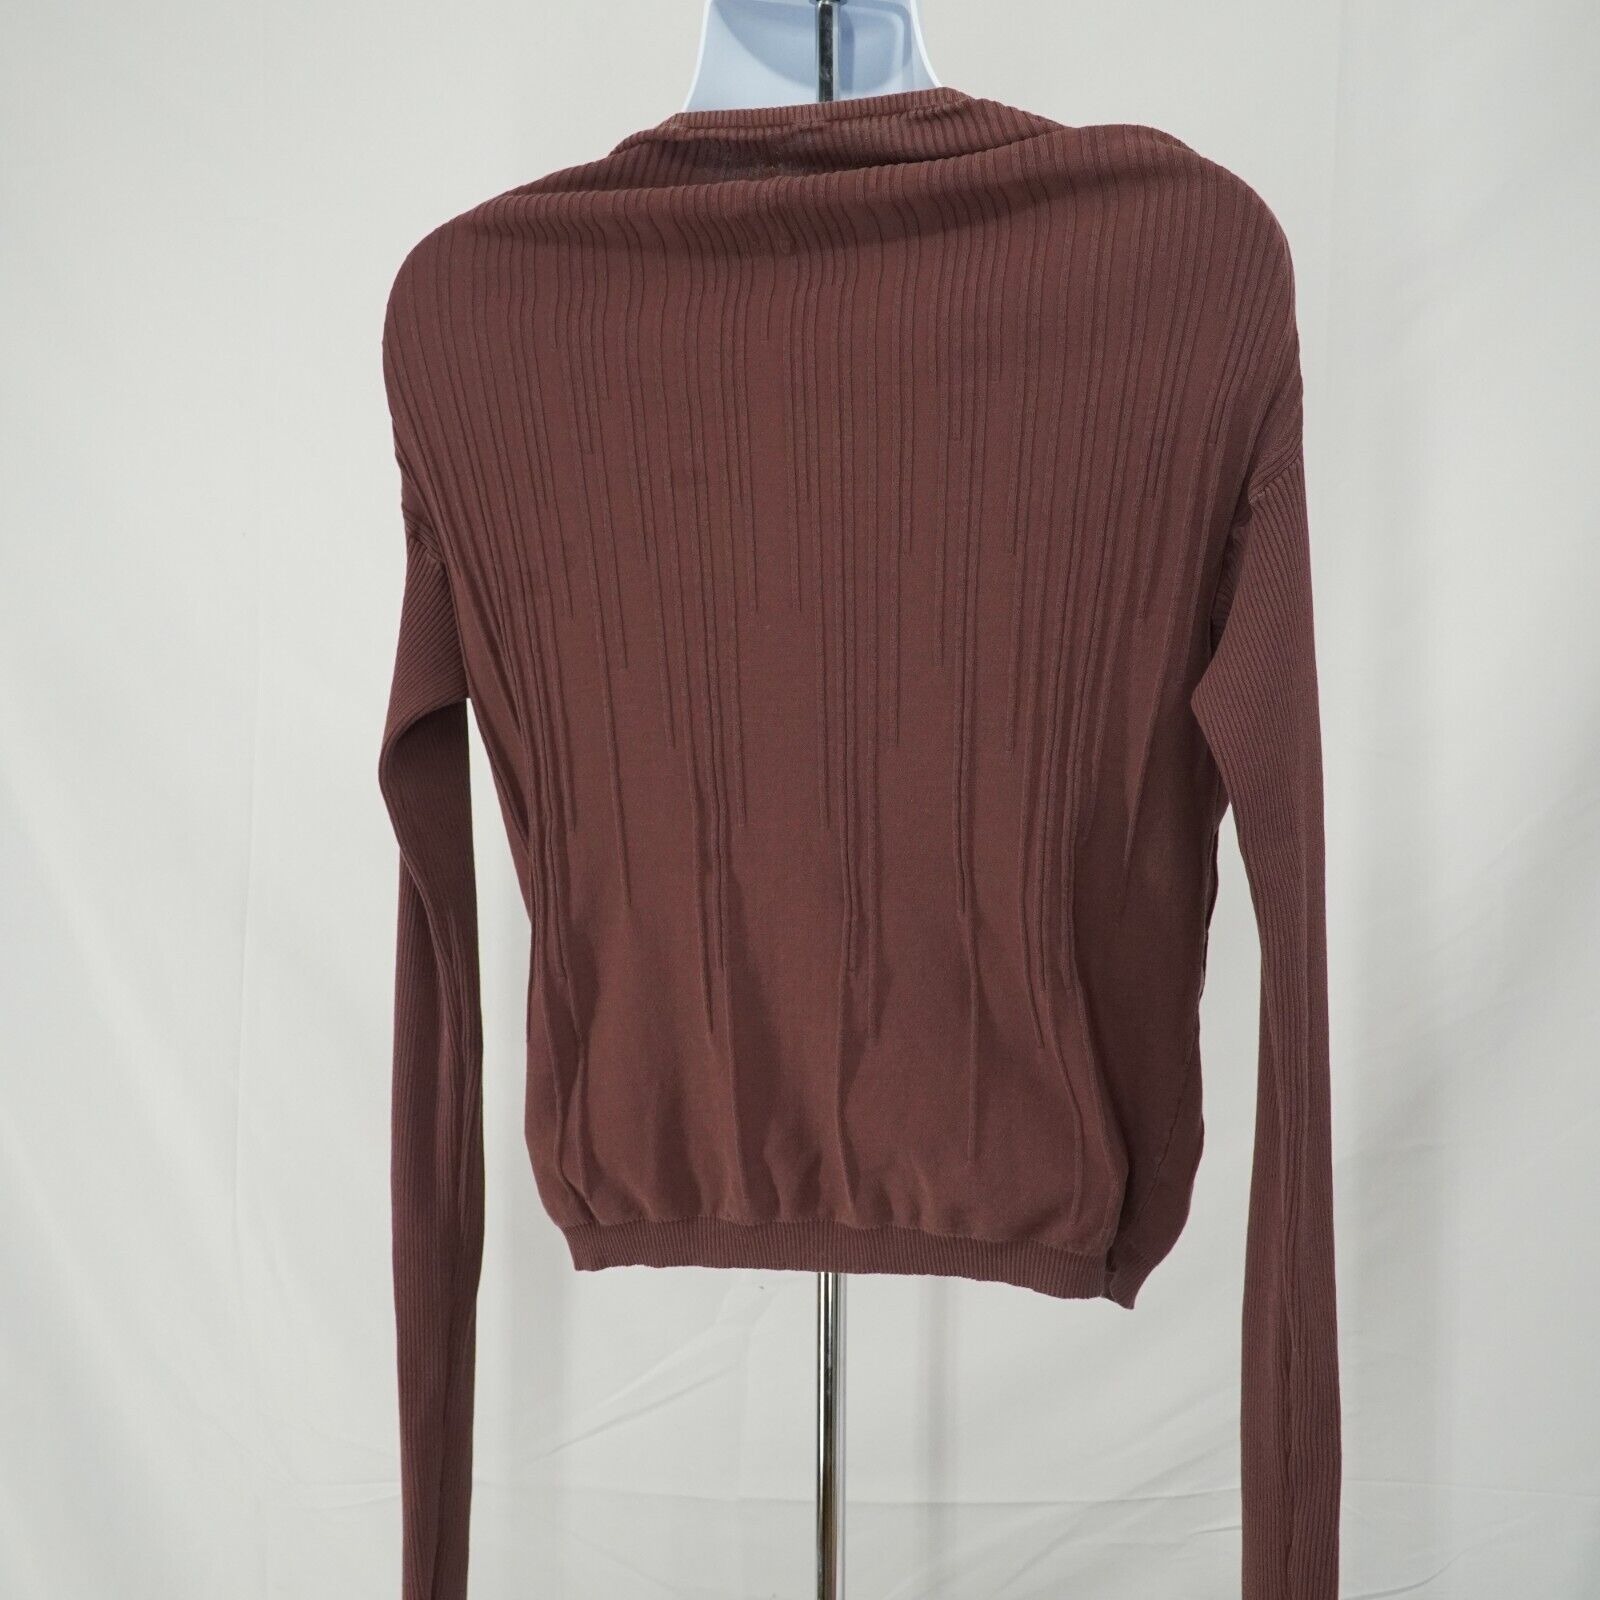 Ribbed Sweater SS17 Walrus Throat Burgundy Red - 11